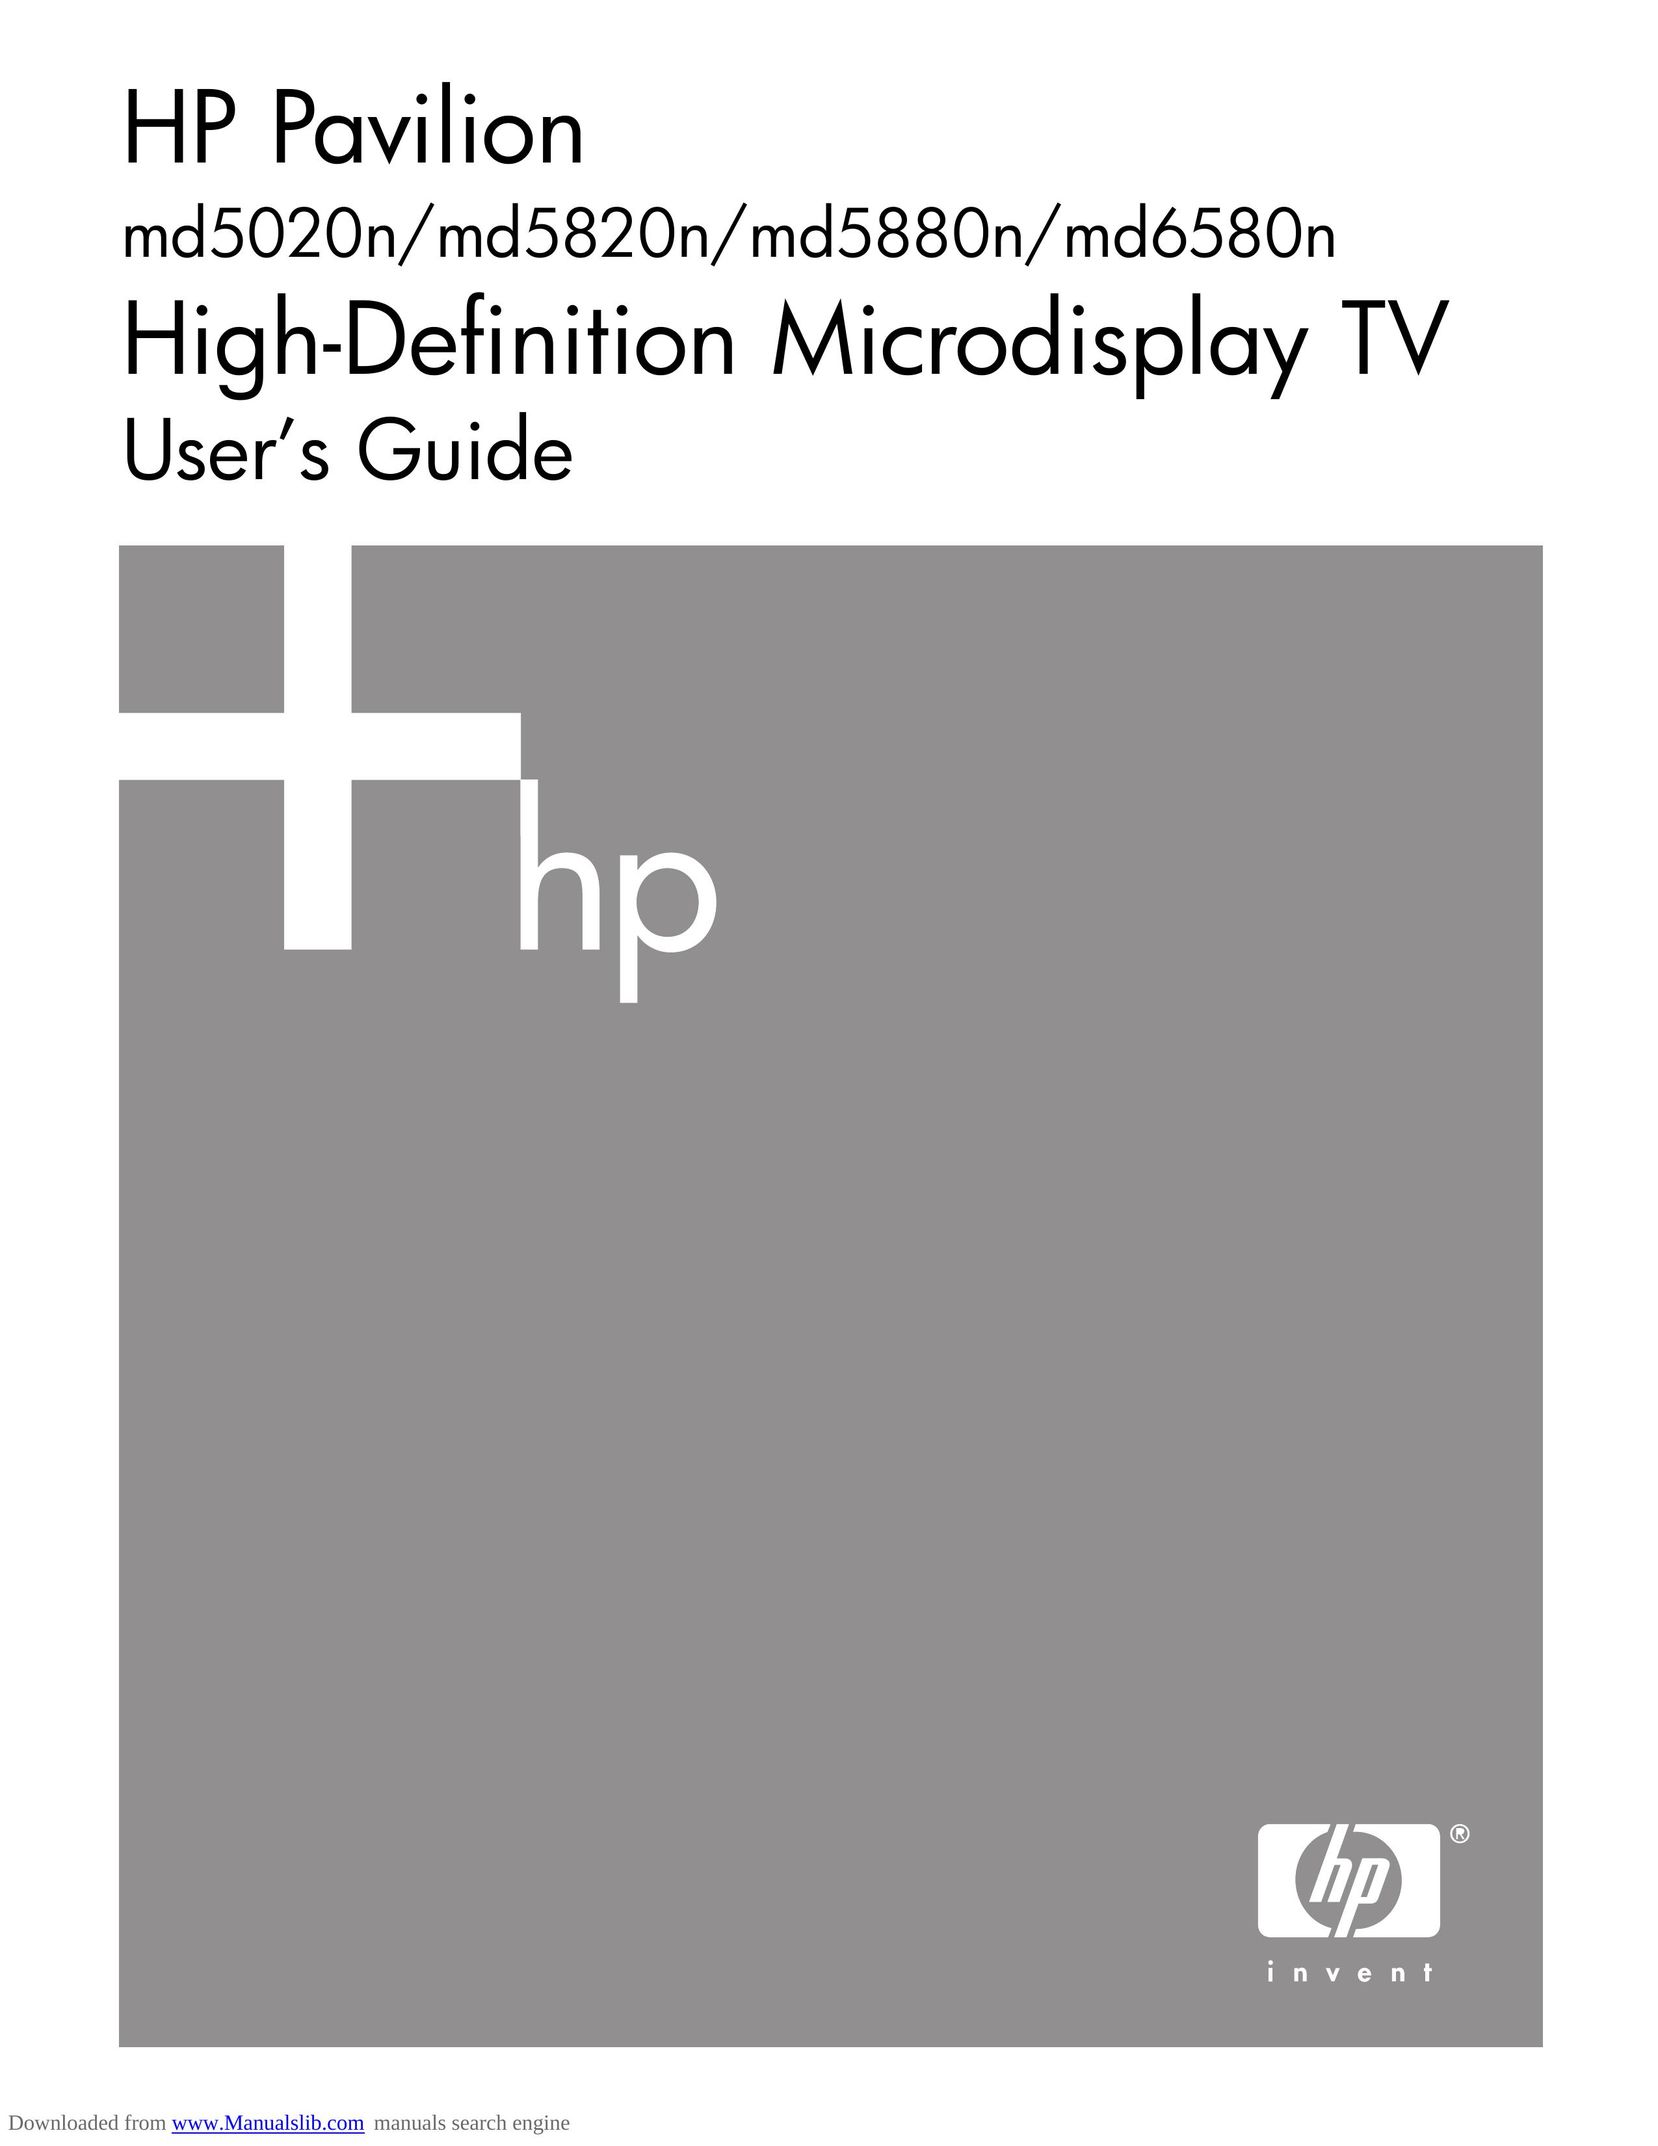 HP (Hewlett-Packard) MD5820N Projection Television User Manual